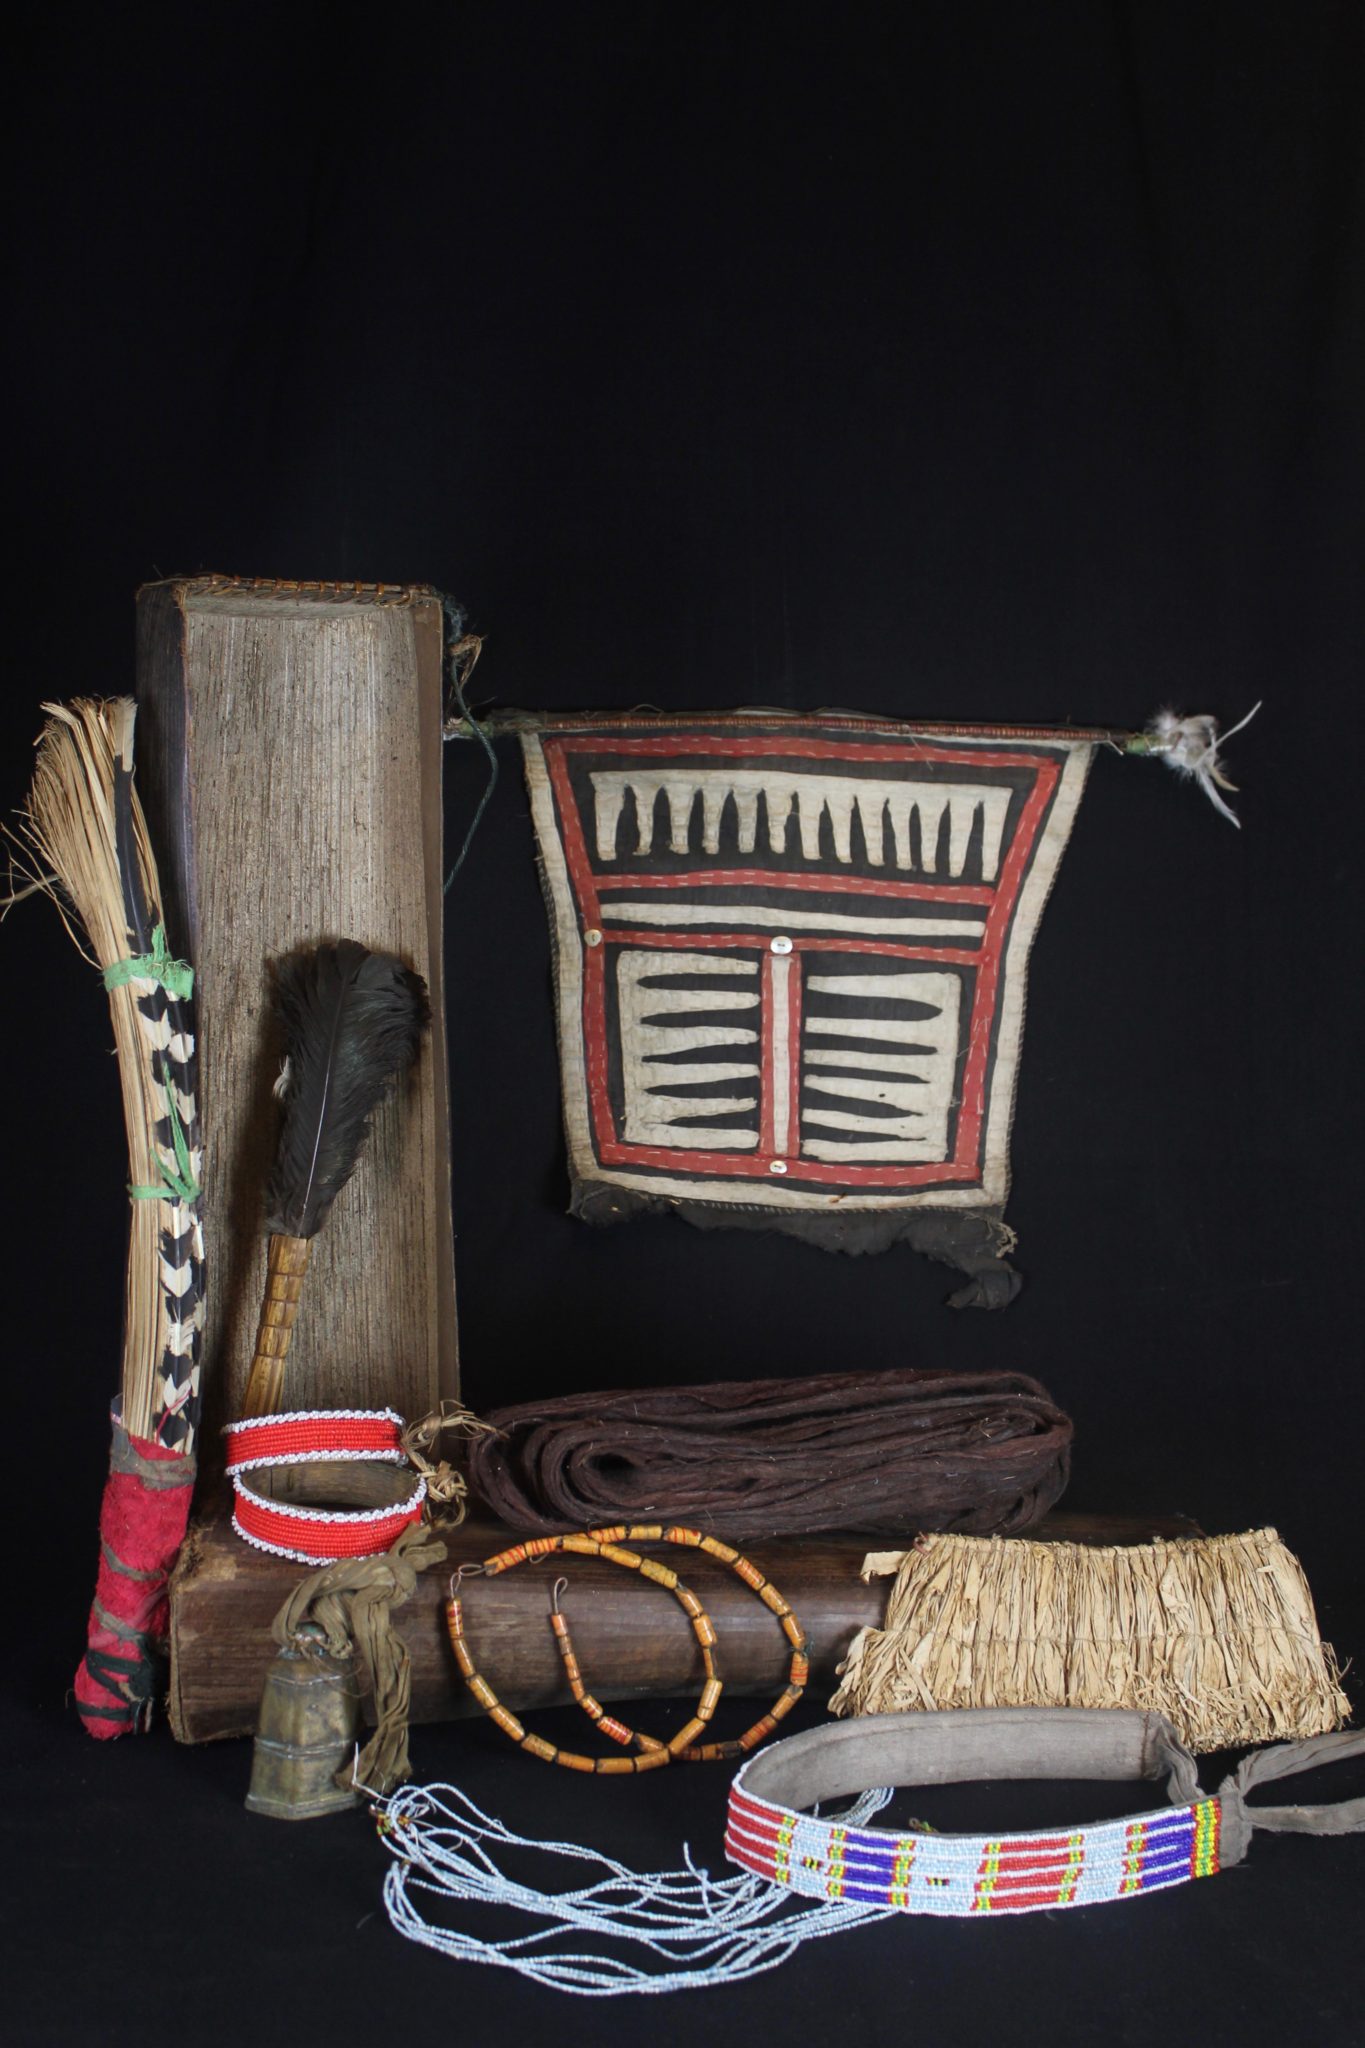 Shaman Kit Box Contents, Mentawai Islands, Sumatra, Indonesia, Mentawai tribe Early to mid 20th c, Case: sago palm leaf box, braided rattan, Raffia wand handle and headband, feathers, European glass trade beads, cotton trade cloth, wood, bronze bell. Contents: costume (loincloth, jewelry, head gear) and wands. All items have a specific purpose - example: the beaded headband acts like antenna attracting spirits the shaman needs to contact. 5 ½” x 7 ½” x 30 ½” $3600.